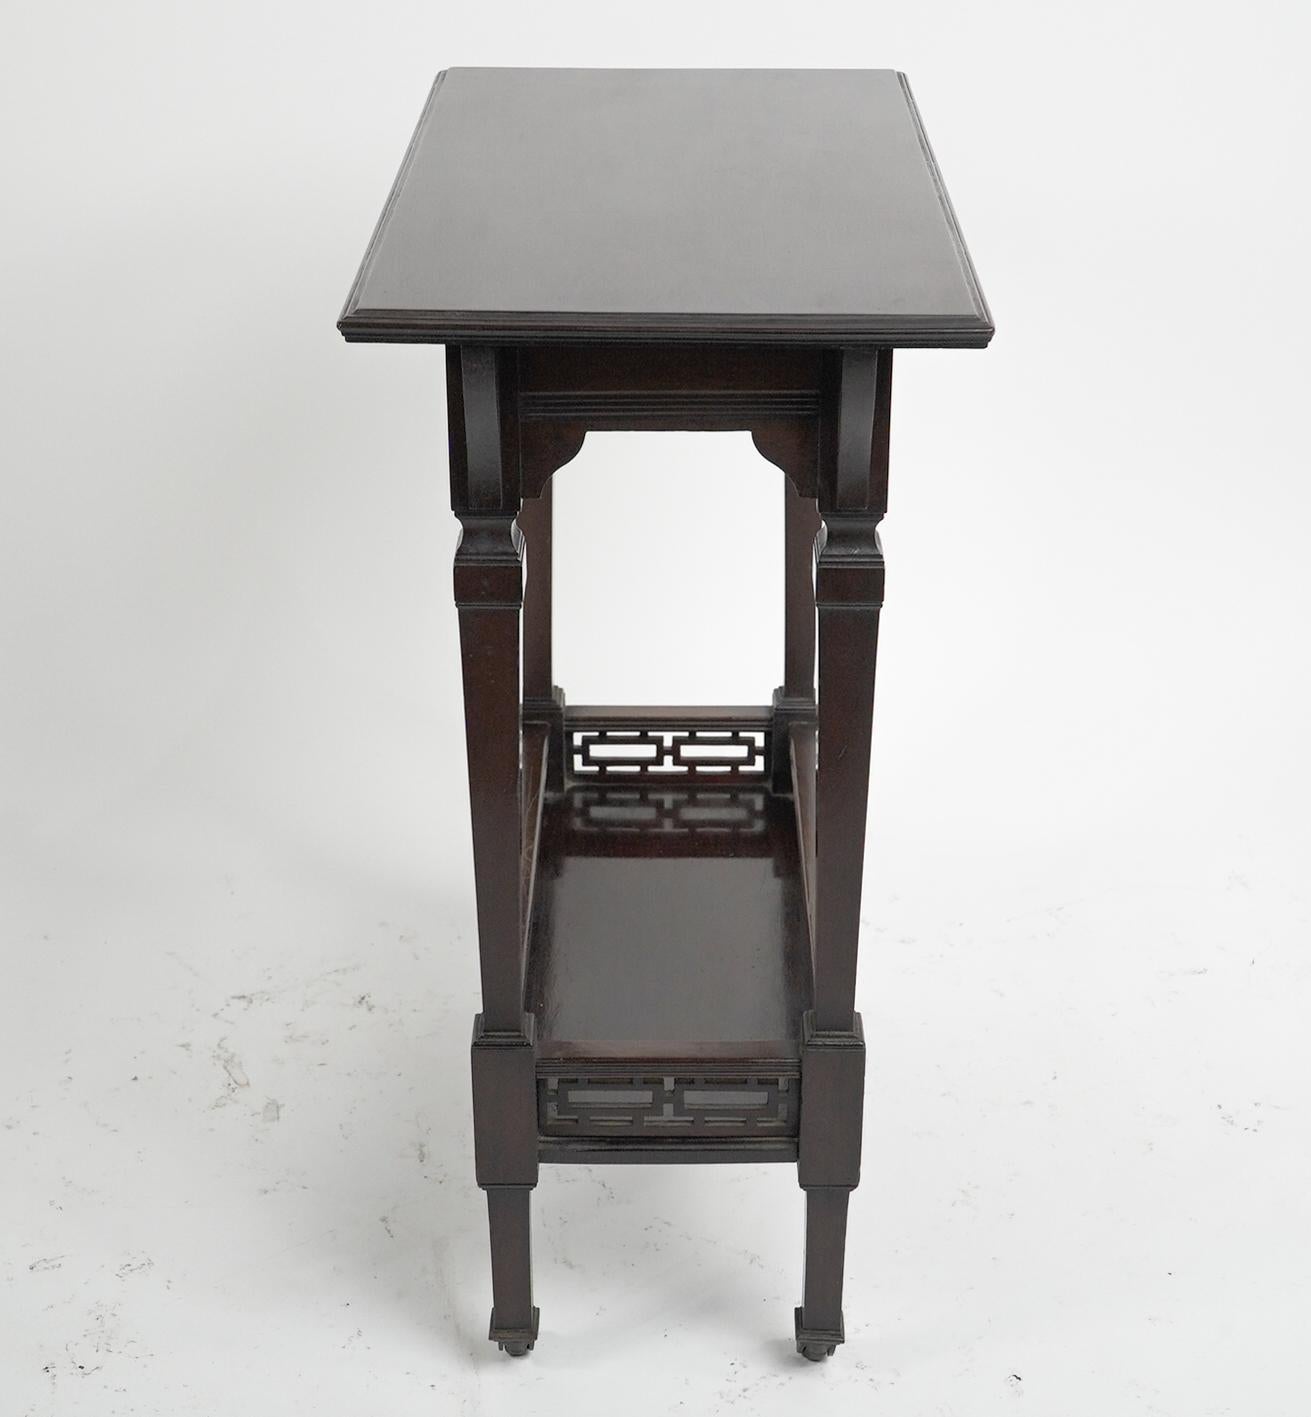 English Collinson & Lock (attributed). A small Aesthetic Movement mahogany side table. For Sale